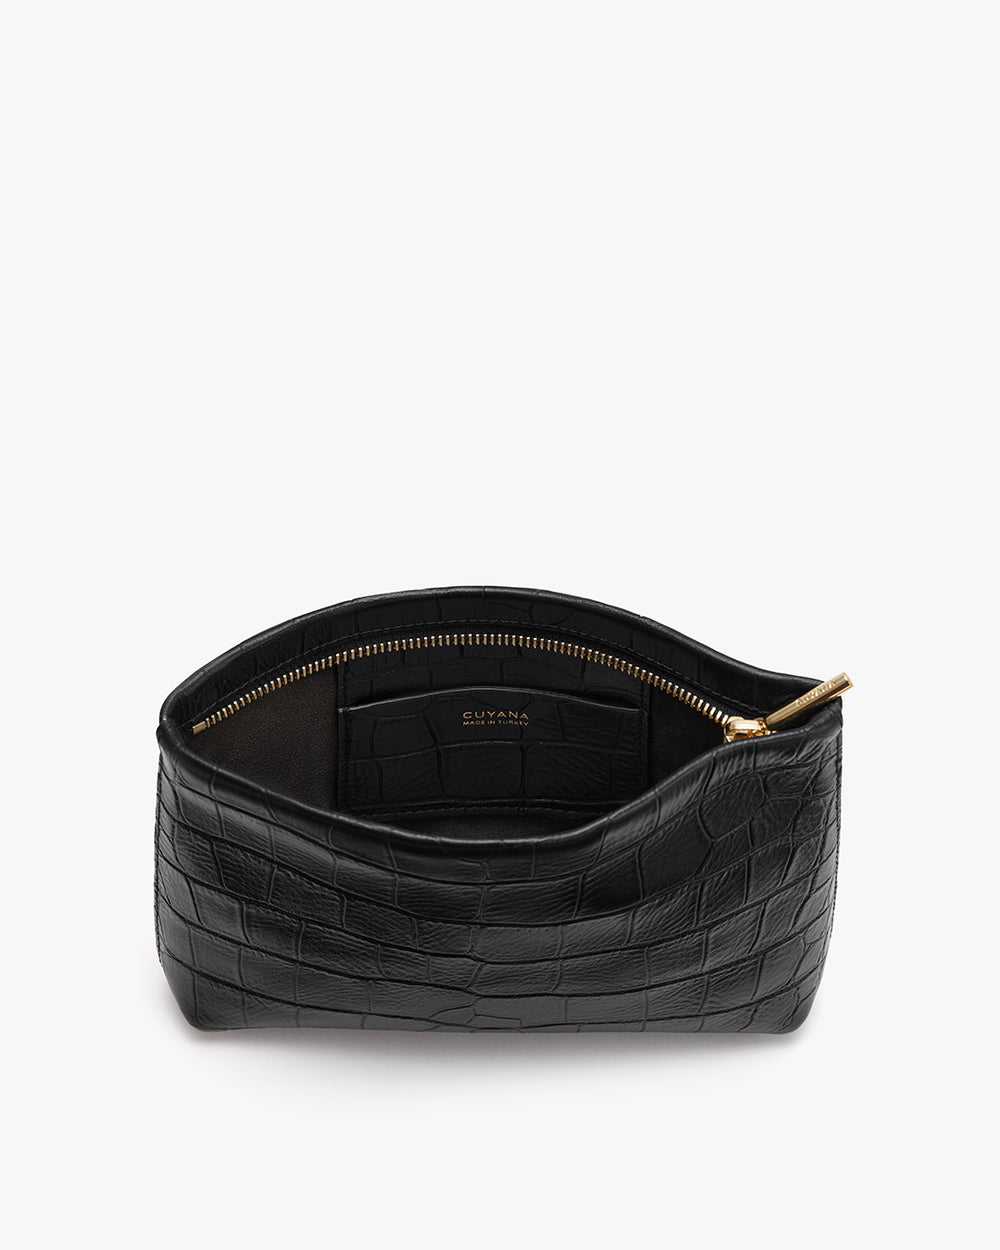 Open croc-embossed leather clutch with zipper